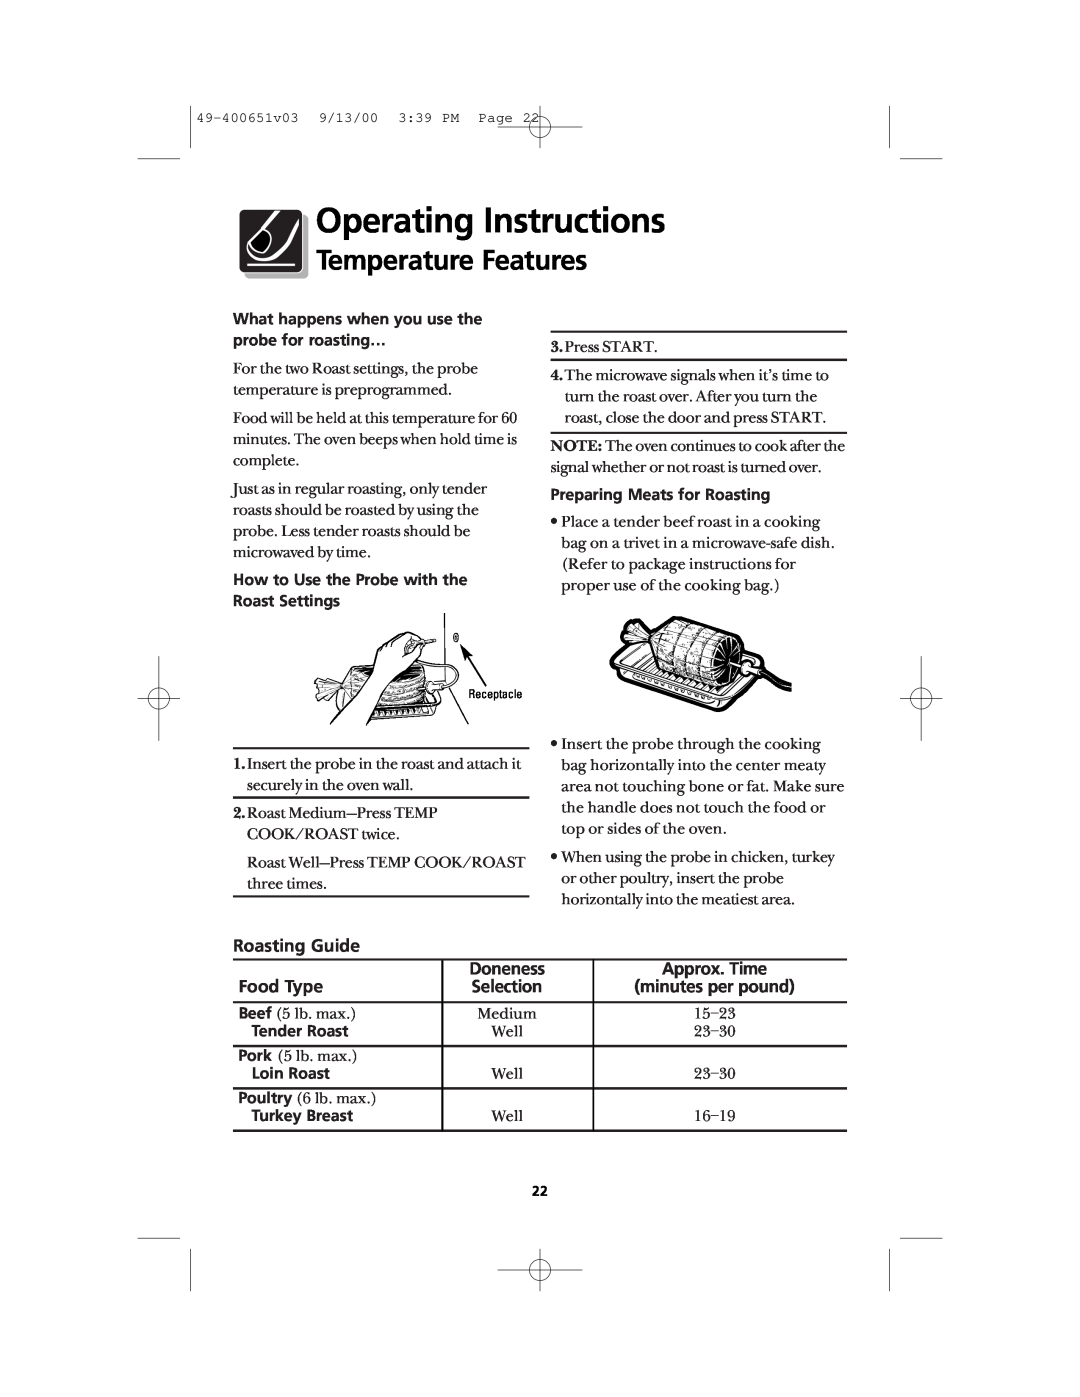 Frigidaire FMT148 warranty Operating Instructions, Temperature Features, Roasting Guide, Doneness, Approx. Time, Food Type 